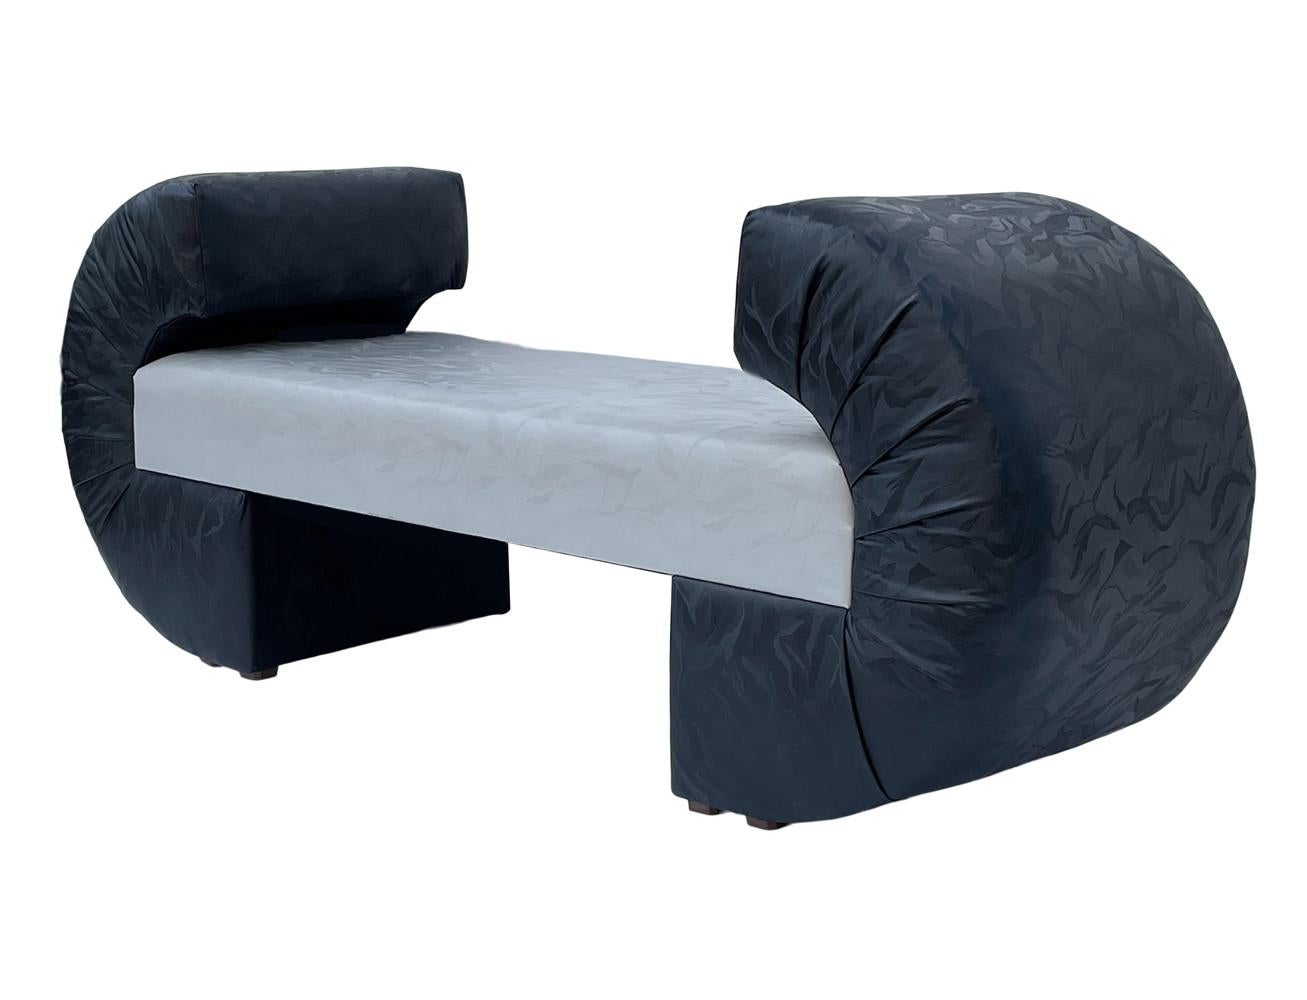 Naugahyde Mid Century Italian Post Modern Sculptural Bench or Settee in Black & Grey For Sale